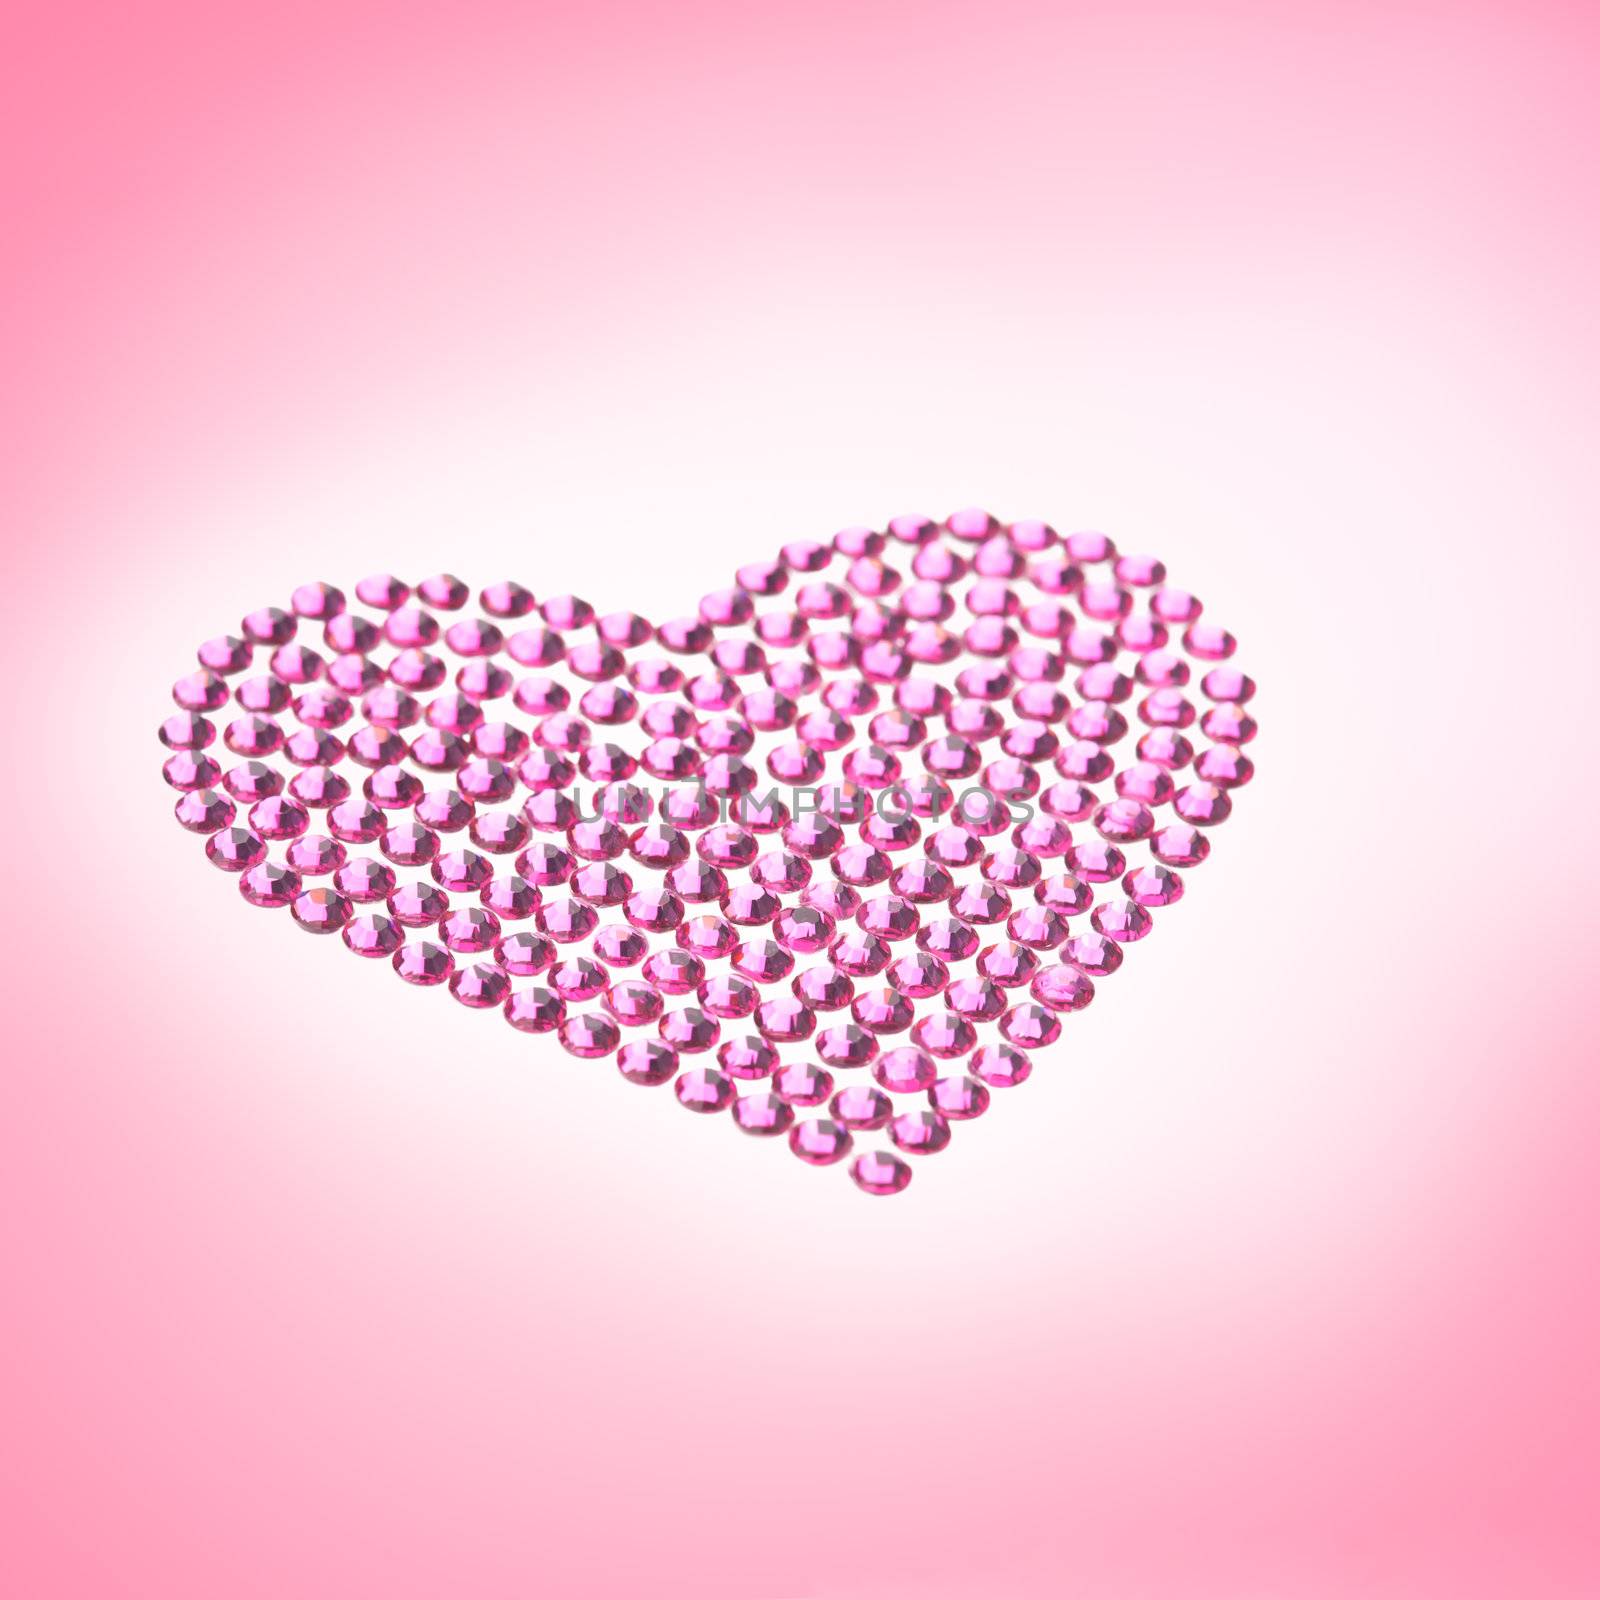 Rhinestones in form of a heart by 3523Studio